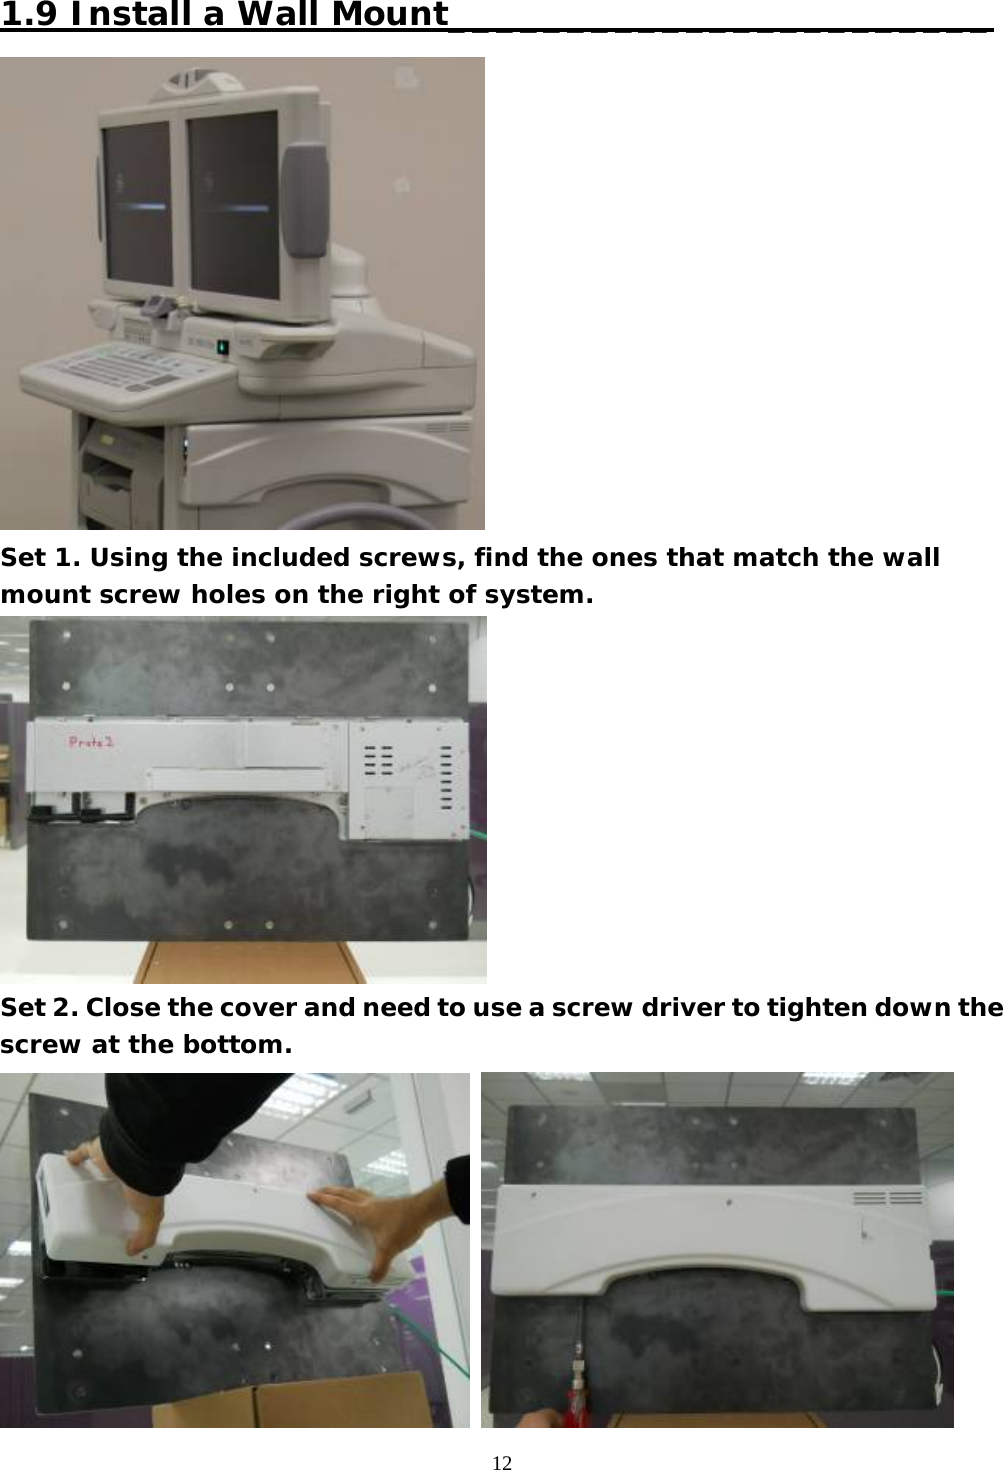  12 1.9 Install a Wall Mount_______________________  Set 1. Using the included screws, find the ones that match the wall mount screw holes on the right of system.  Set 2. Close the cover and need to use a screw driver to tighten down the screw at the bottom.   